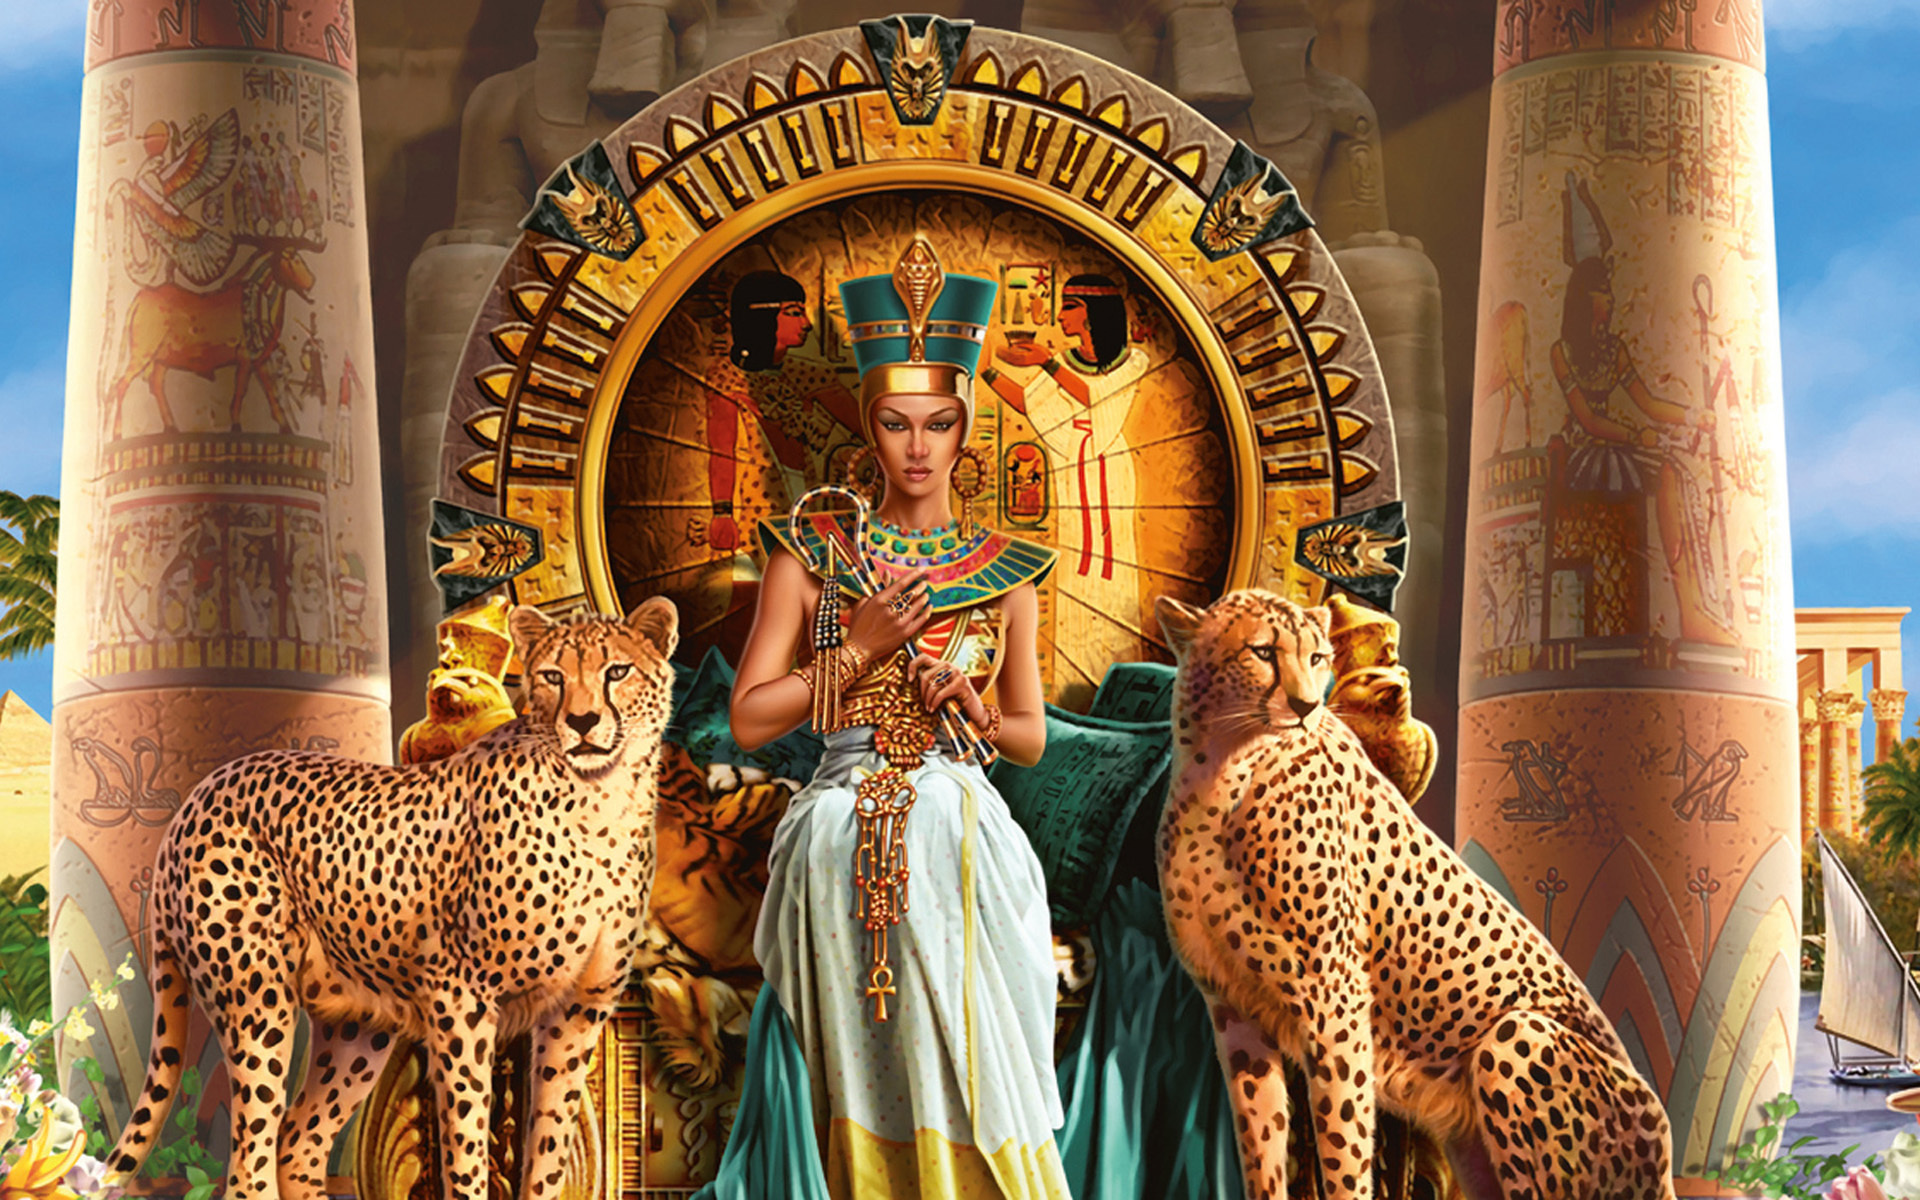 cleopatra, Vii, Philopator, Pharaoh, Ancient, Egypt, Ptolemaic, Dynasty, Egyptian, Animals, Cats, Cheetah, Throne, Color, Detail, Jewelry, Gold, Architecture, Buildings, Dress, Gown, Queen, Fantasy, Spots, Women, Wallpaper